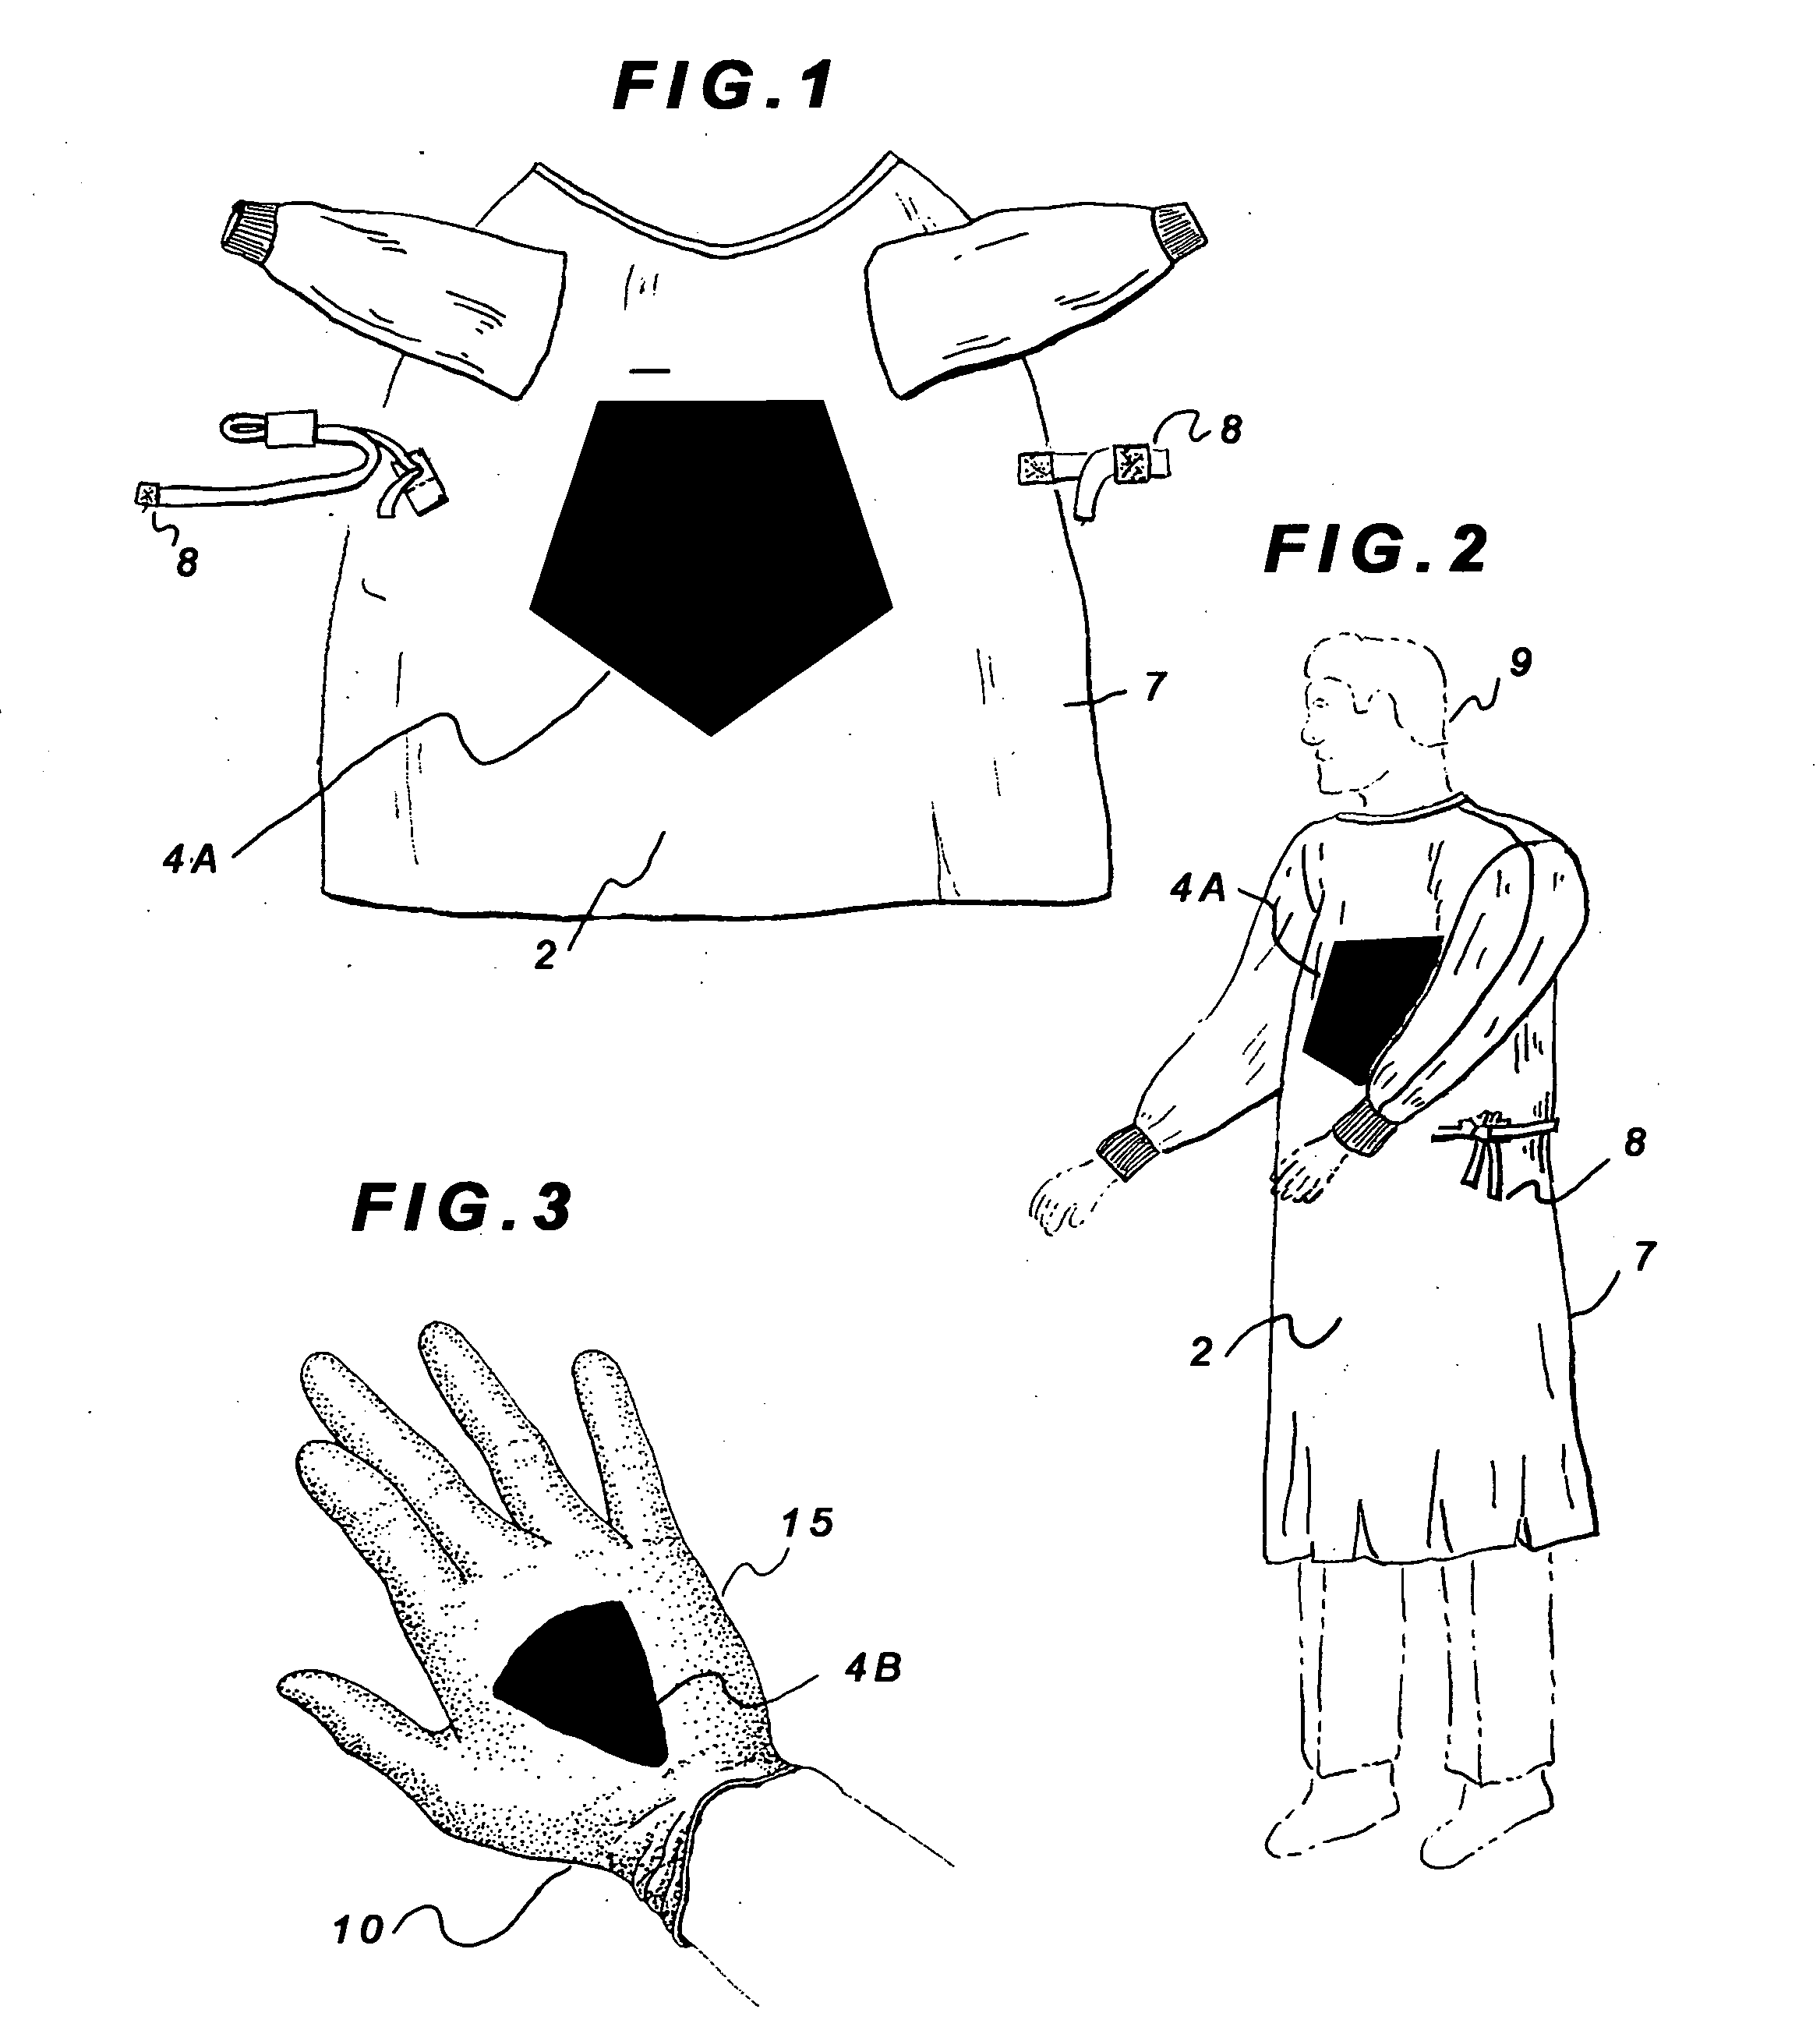 System and method for monitoring protective garments